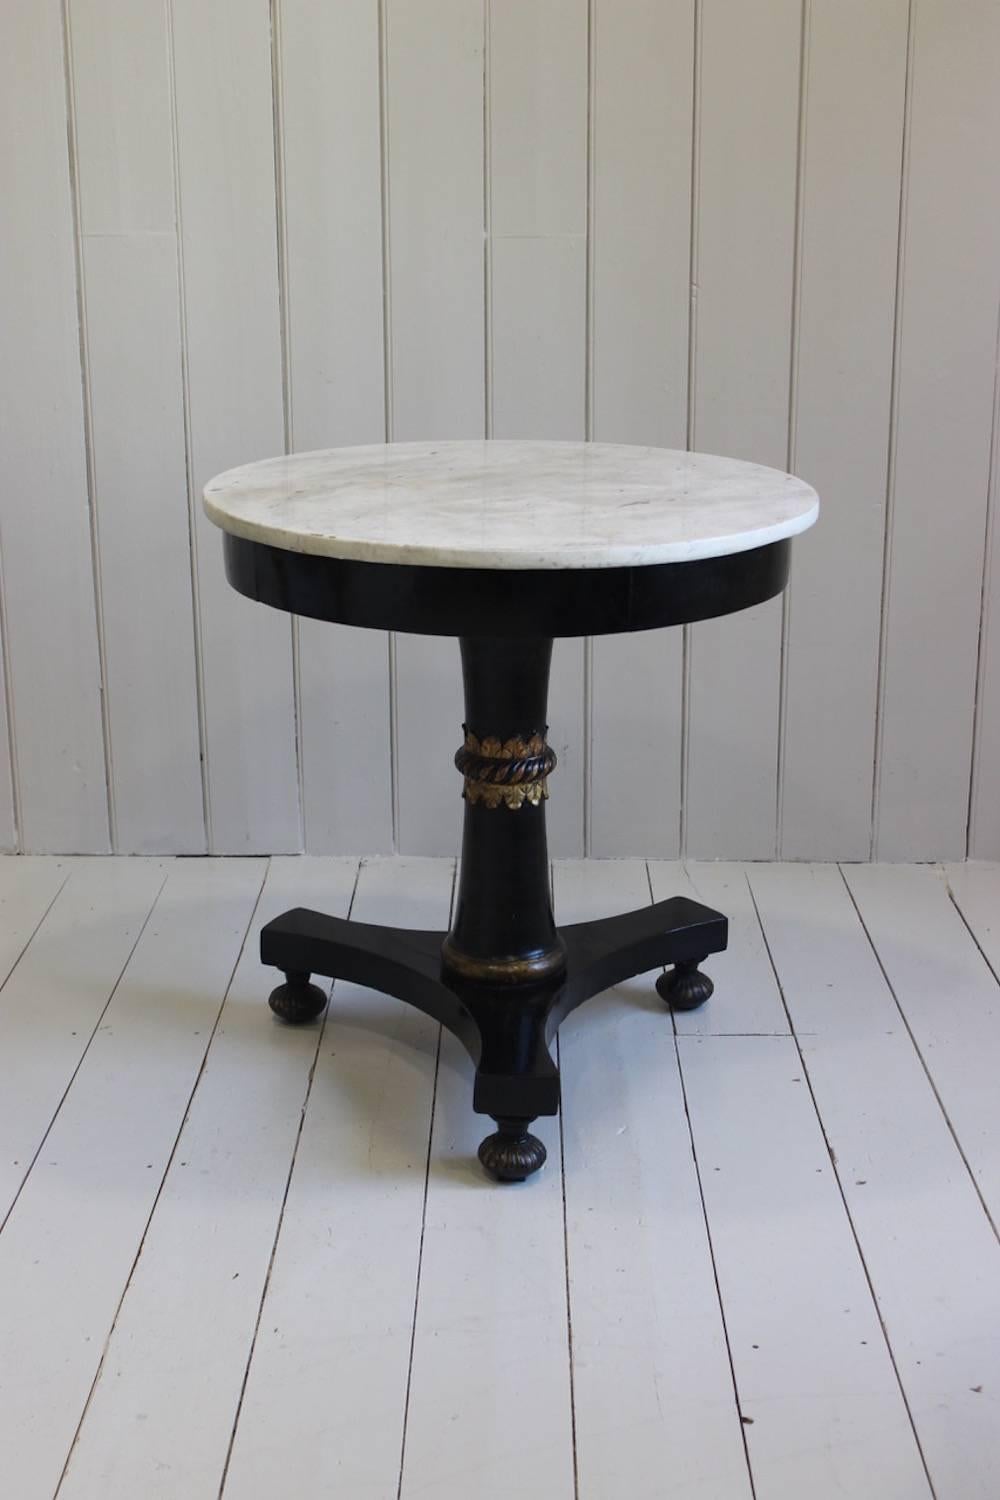 A very smart and stylish ebonized and parcel-gilt gueridon or small centre table with its original white marble top and triform base with bun feet, the column with a spiral-bound decorative stiff-leaf motif, Italian, early 19th century.